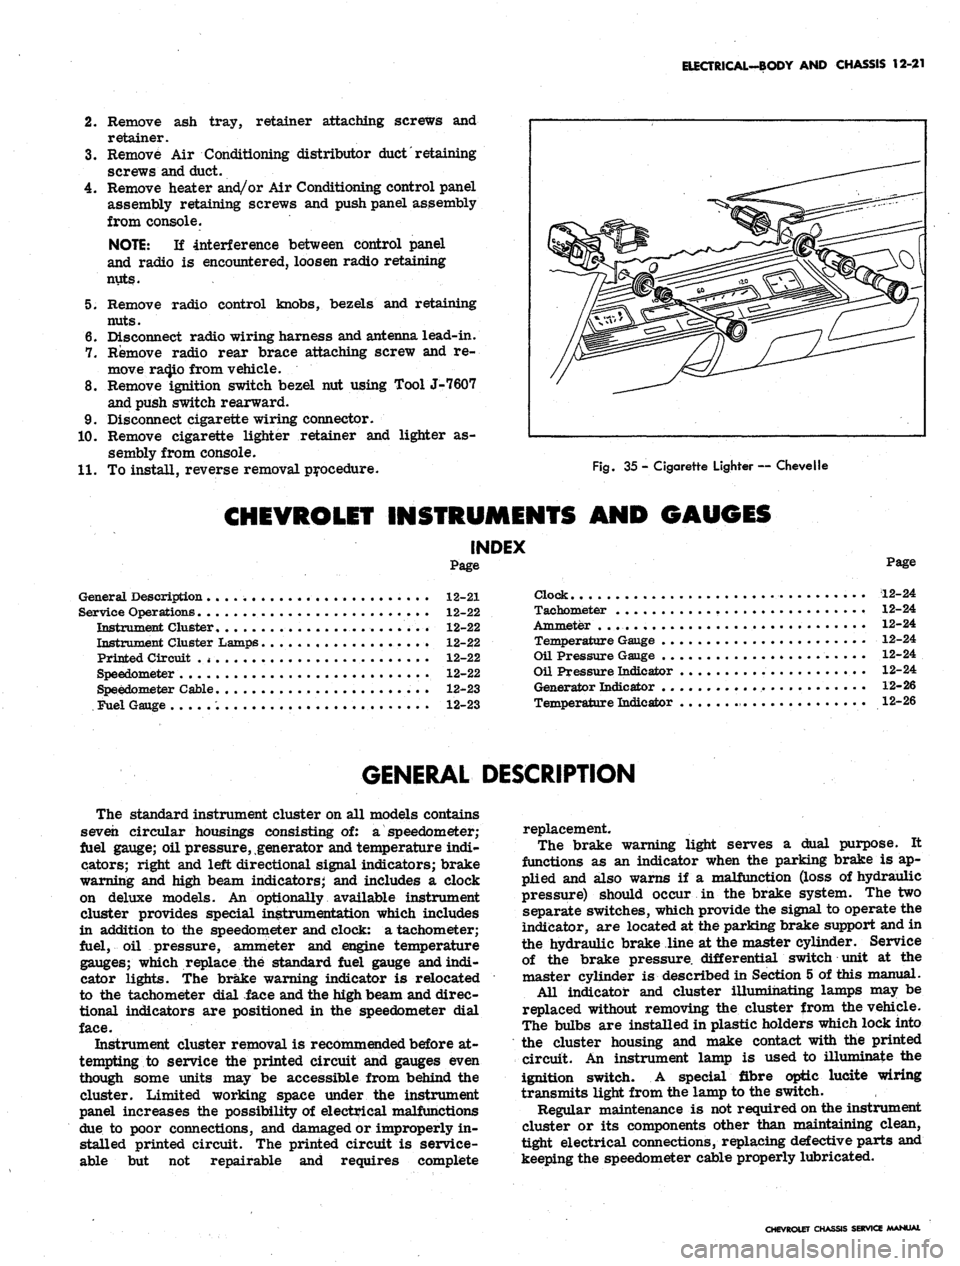 CHEVROLET CAMARO 1967 1.G Chassis Workshop Manual 
ELECTRICAL-BODY AND CHASSIS 12-21

2.
 Remove ash tray, retainer attaching screws and

retainer.

3.
 Remove Air Conditioning distributor
 duct
 retaining

screws and duct.

4.
 Remove heater and/or